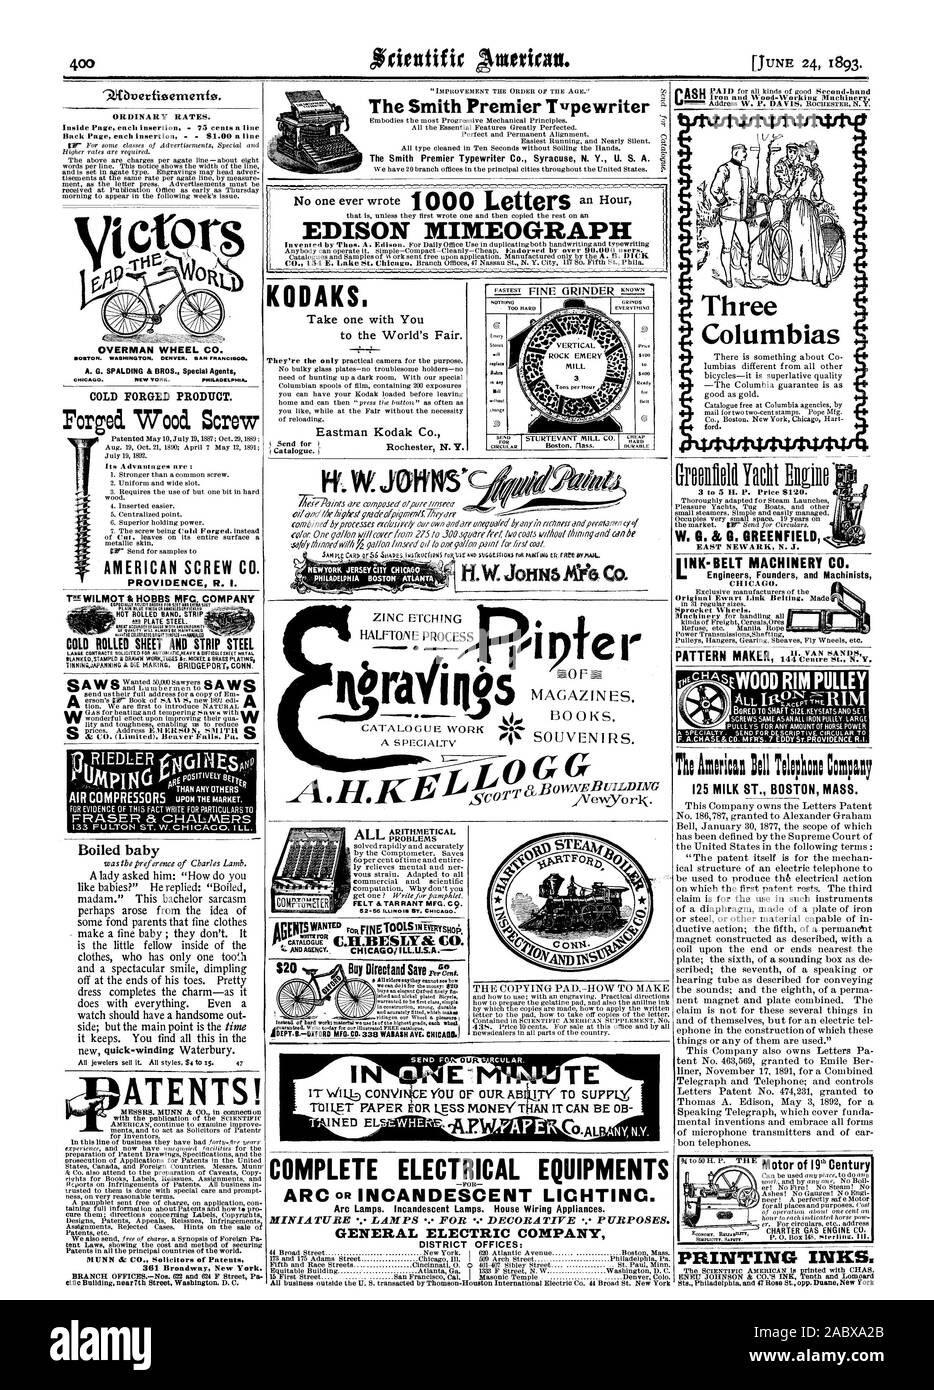 Buy Direct and Save reMent. Arc Lamps. Incandescent Lamps. House Wiring Appliances. MINIATURE LAMPS FOR DECORATIVE PURPOSES. GENERAL ELECTRIC COMPANY DISTRICT OFFICES: OVERMAN WHEEL CO. BOSTON. WASHINGTON.  SAN FRANCISCO. A. G. SPALDING & BROS. Special Agents Forged. 'Wood Screw ATENTS! 361 Broadway New York. KODAKS. Take one with You to the World's Fair. Eastman Kodak Co. PRINTING INKS. rE WILMOT & HOBBS MFC. COMPANY HOT ROLLED BAND. STRIP COLD ROLLED SHEET AND STRIP STEEL NGINESoi THAN ANY OTHERS FOR EVIDENCE OF THIS FACT WRITE FOR PARTICULARS T Boiled baby W. G. & G. GREENFIELD EAST NEWARK Stock Photo